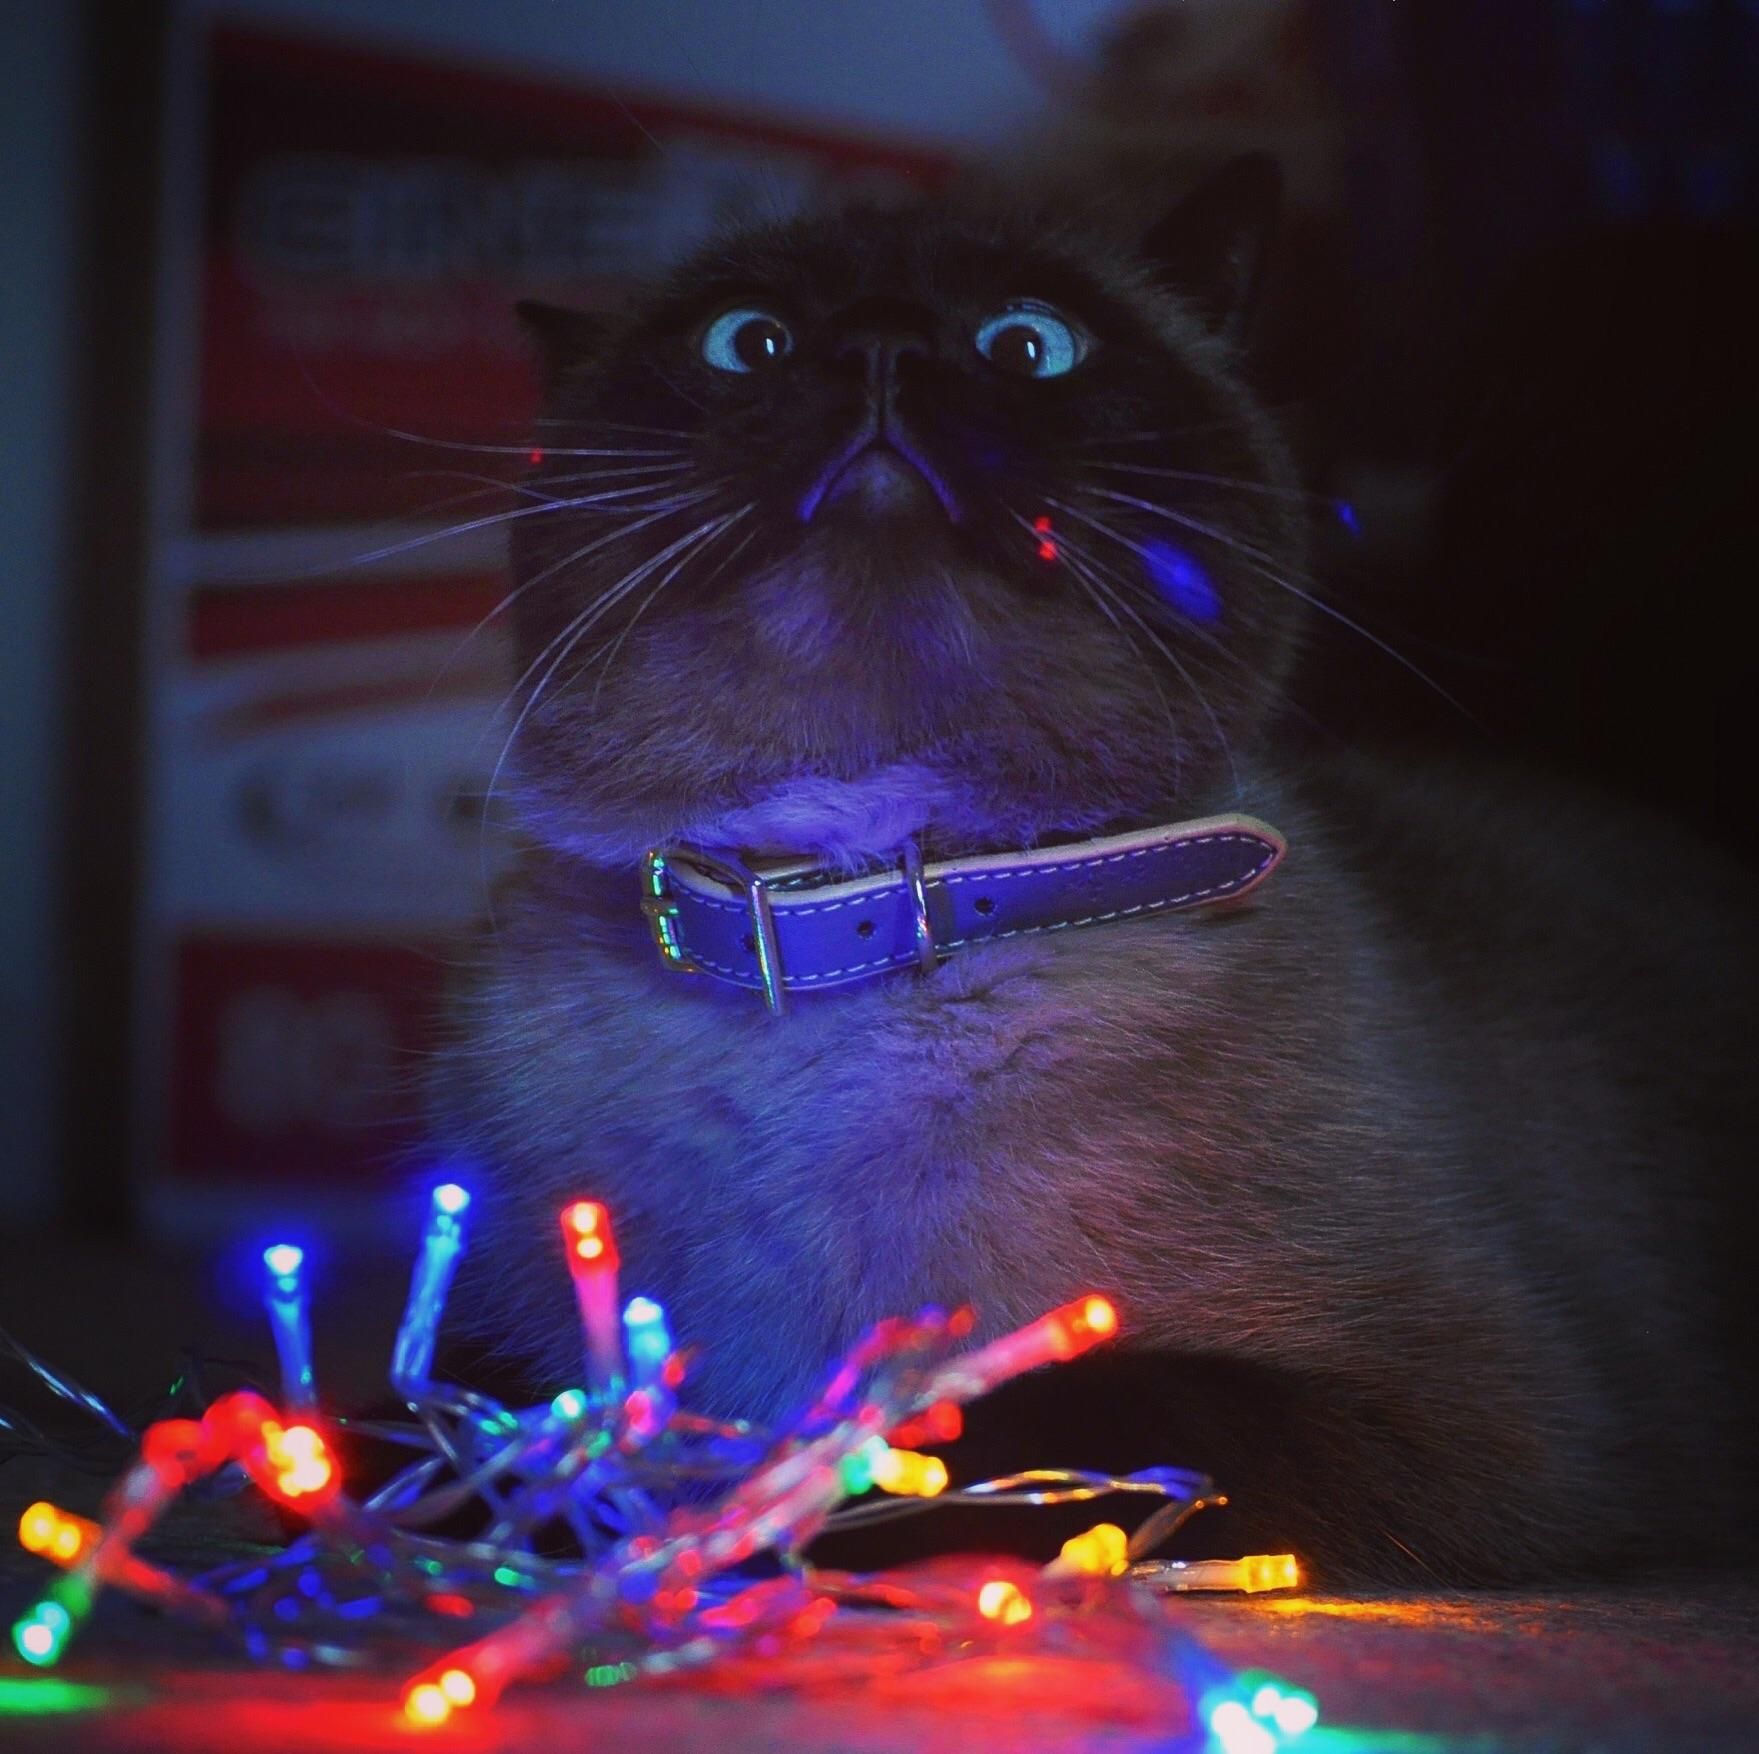 I thought it’d be cute to get a photo of my cat with fairy lights....